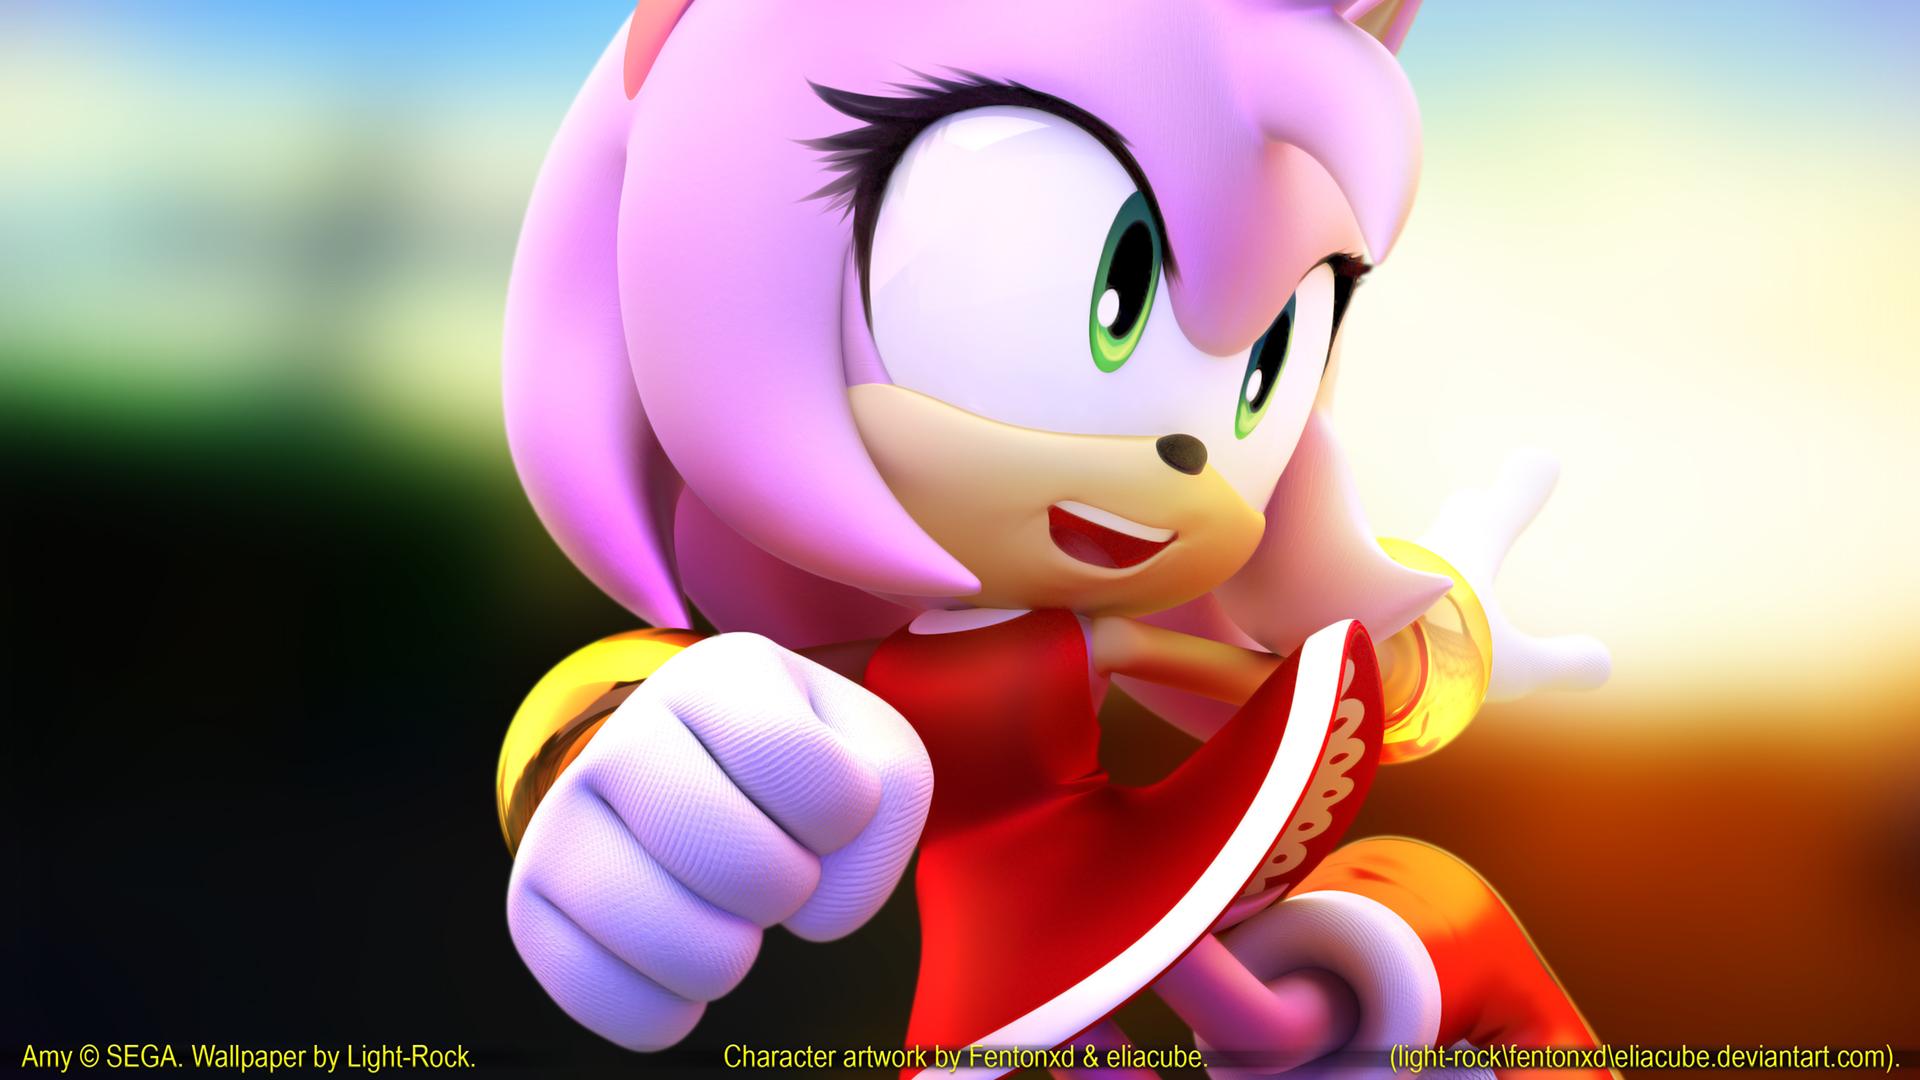 Free download Amy Rose Wallpaper amy rose 31834790 600 450jpg 600x450 for  your Desktop Mobile  Tablet  Explore 77 Amy Rose Wallpaper  Amy Adams  Wallpaper Amy Lee Wallpaper Amy Pond Wallpaper